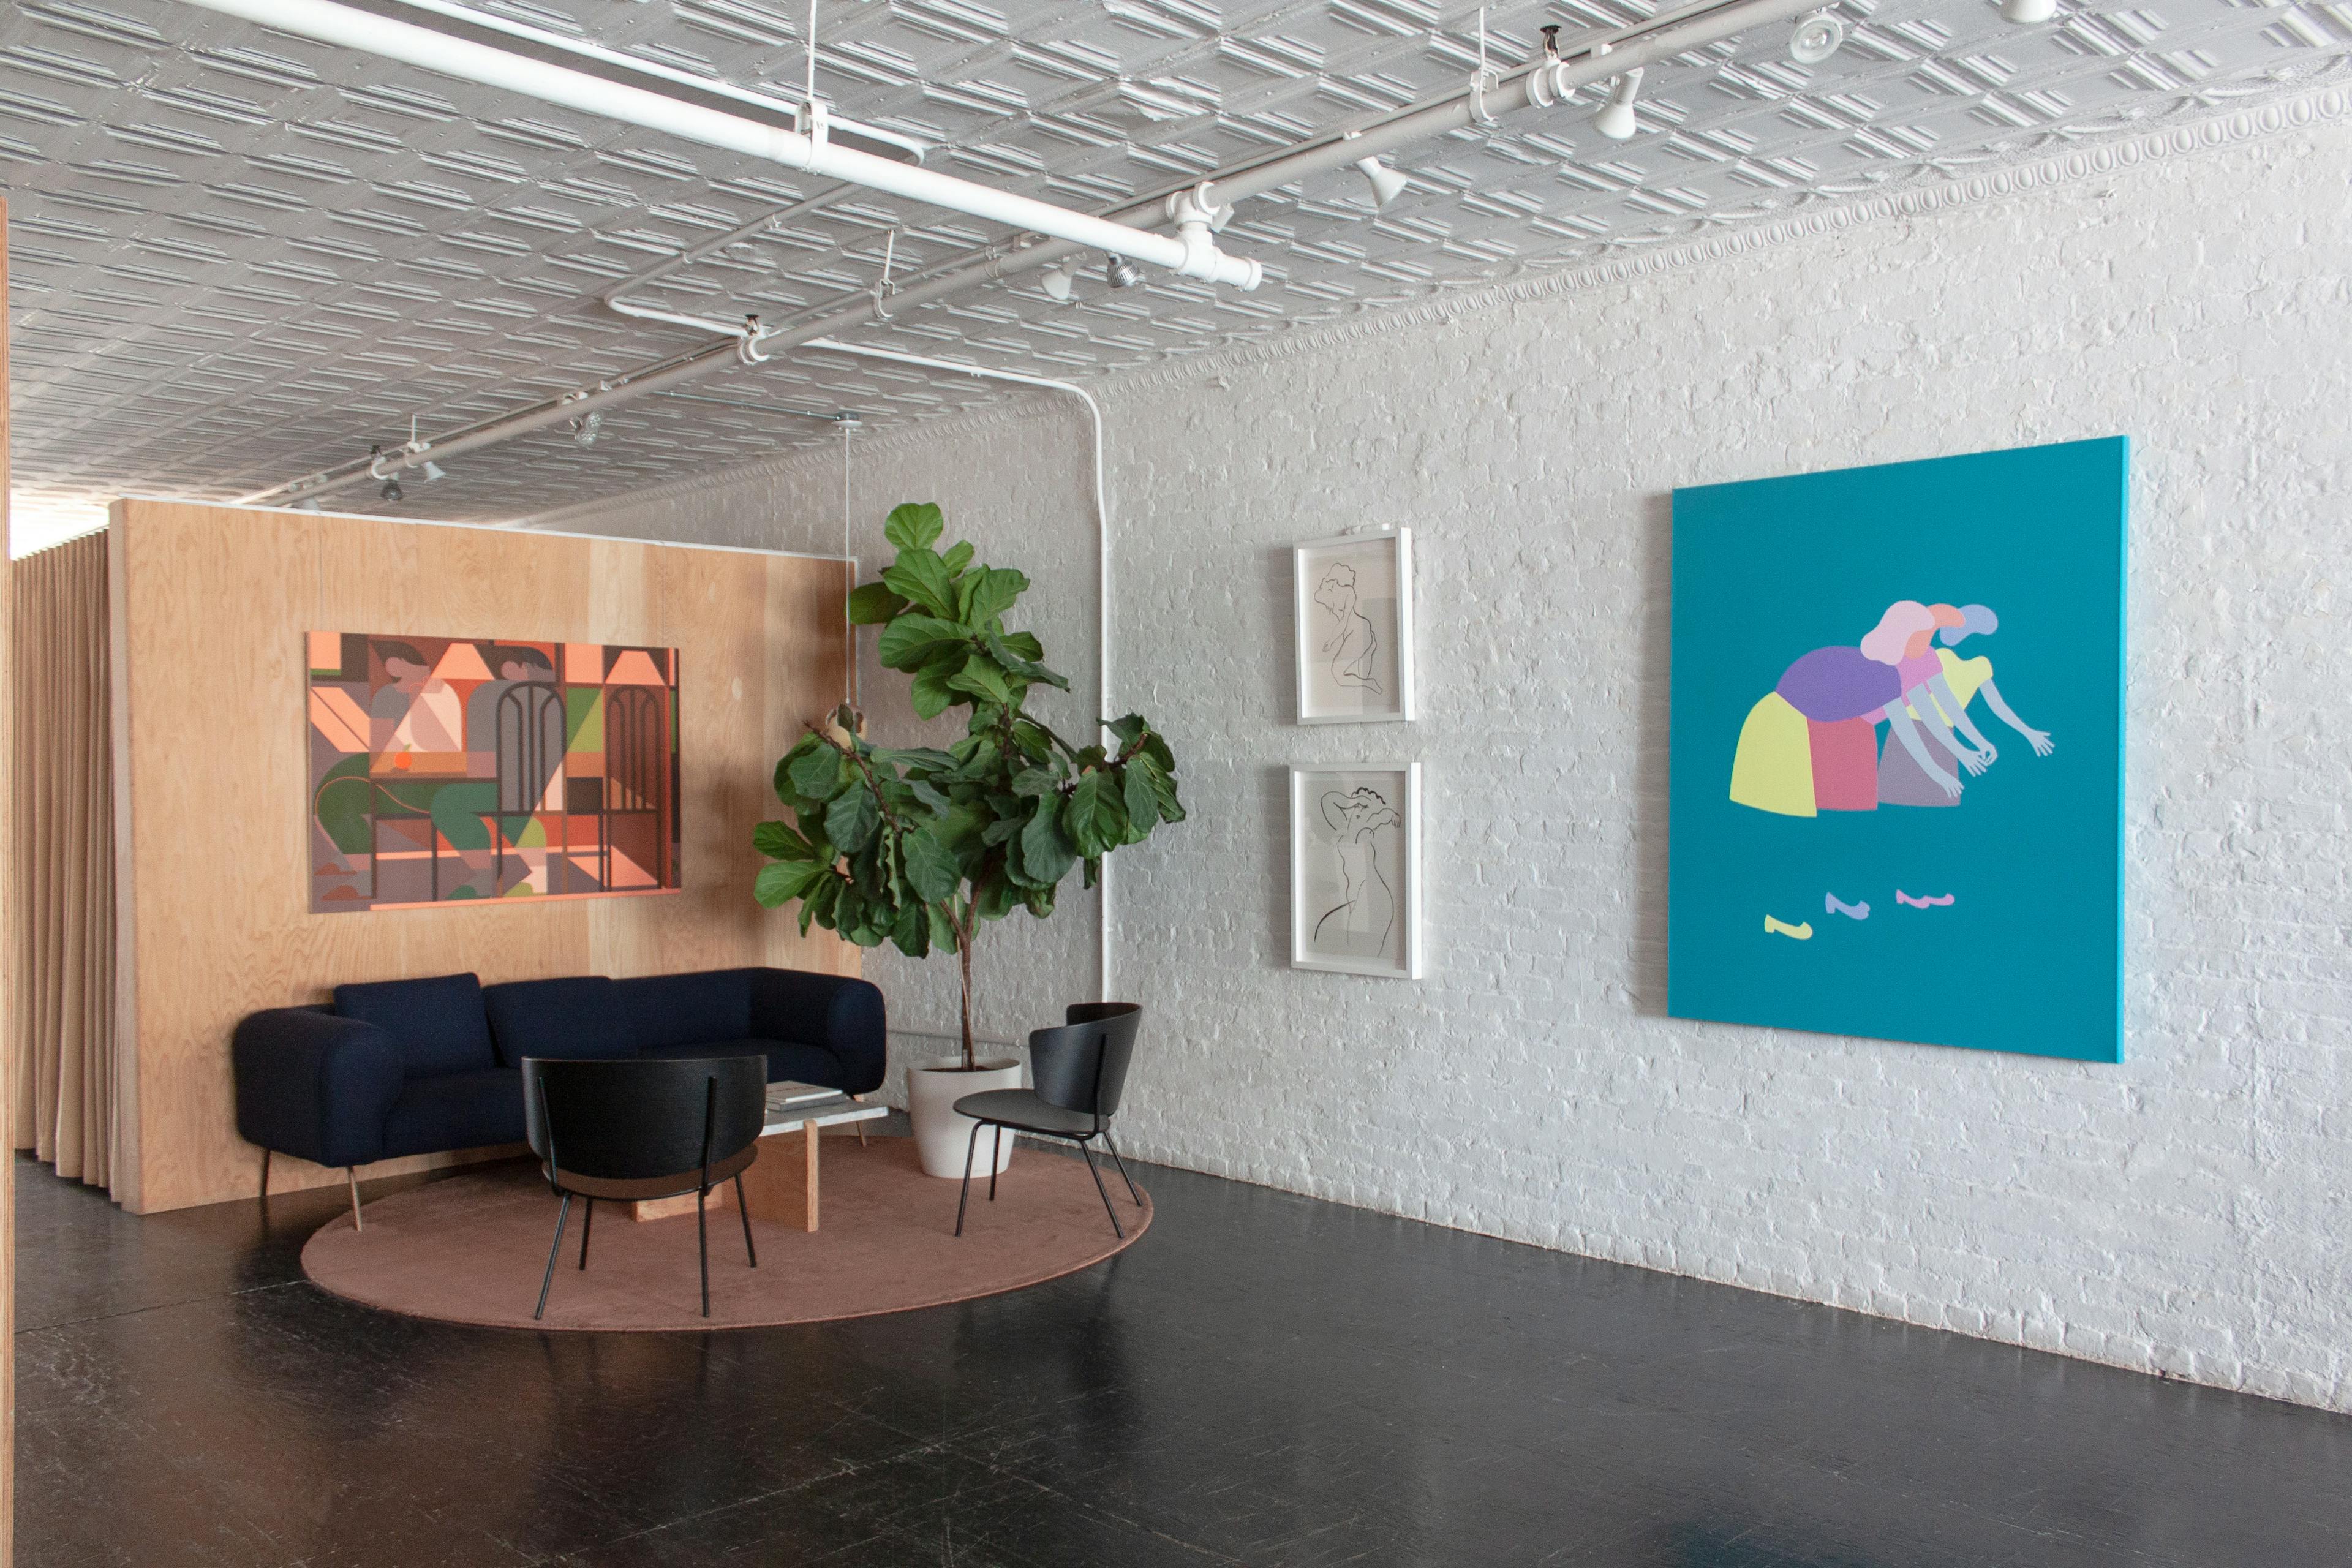 A teal painting of characters reaching by artist Dana Bell next to artwork by artists Ousmane Ba and Adrian Kay Wong above a blue sofa at Uprise Art for the Figurative collection.